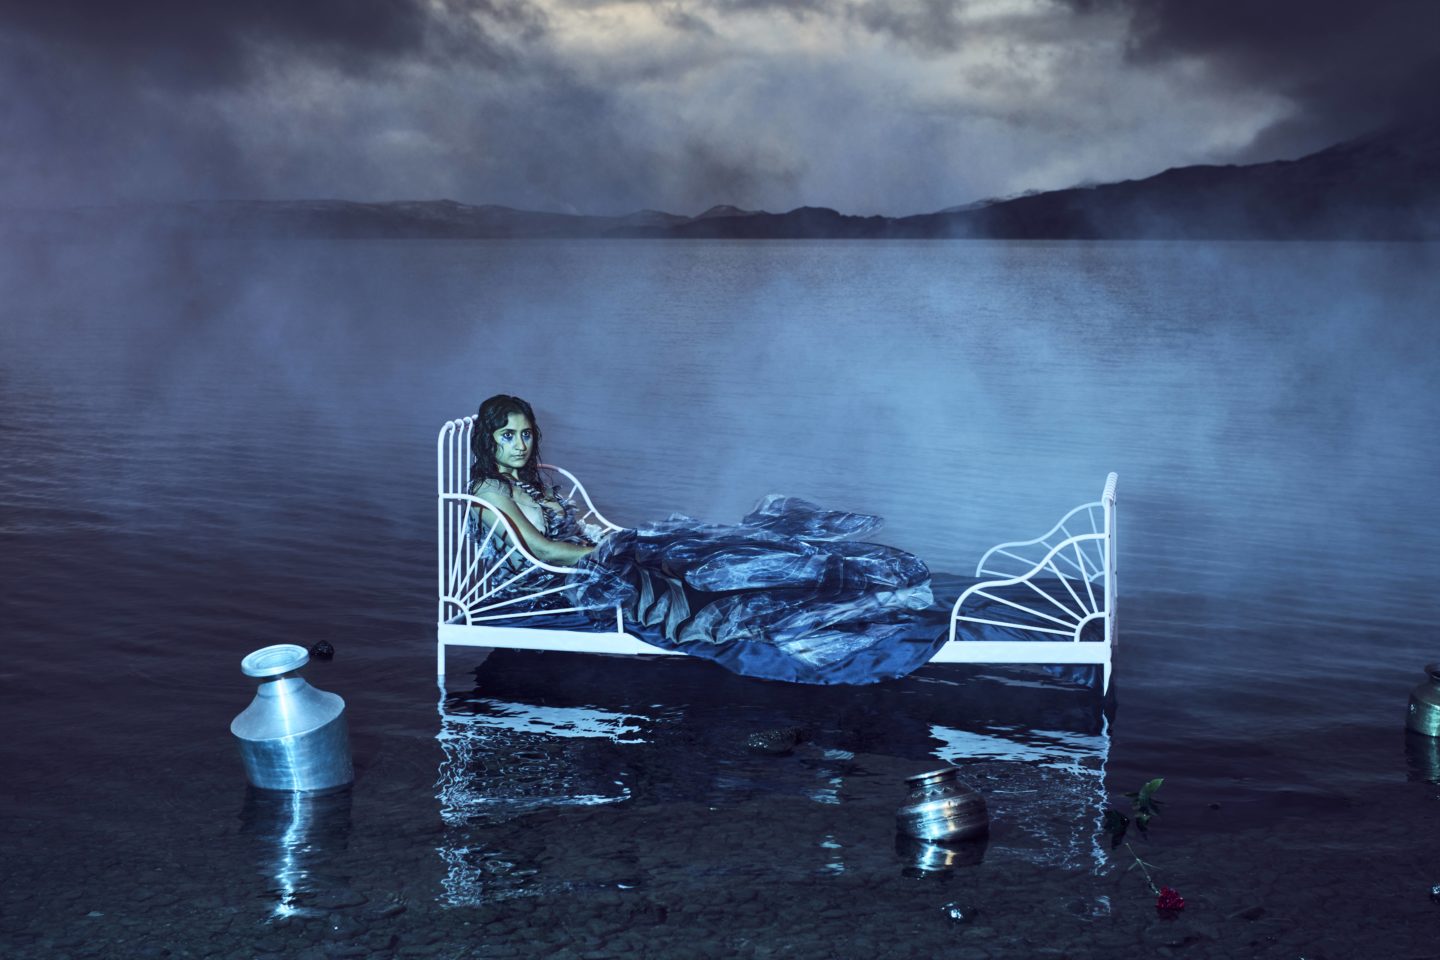 A woman lies in a bed which stands in water